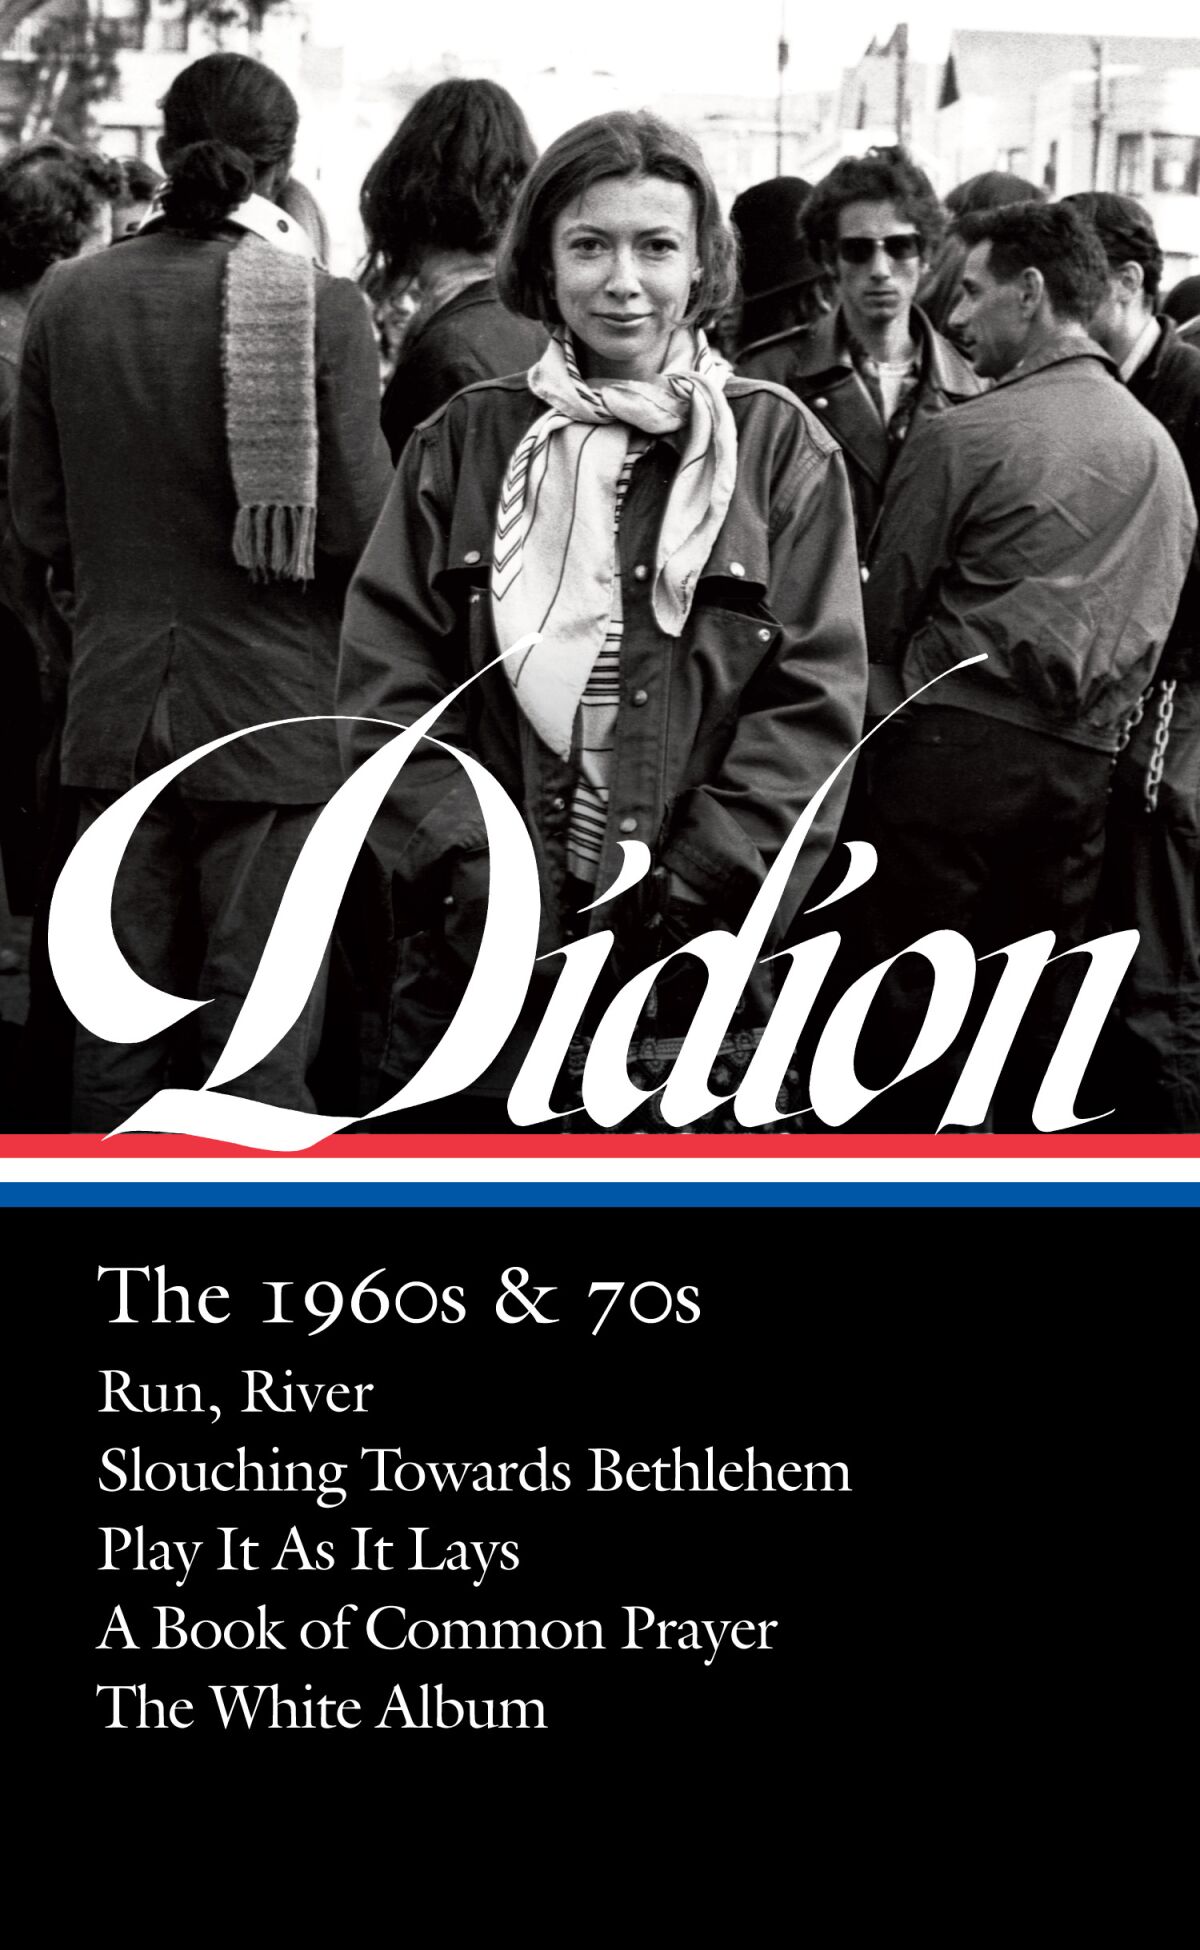 Book jacket for "Didion: The 1960s & 70s"